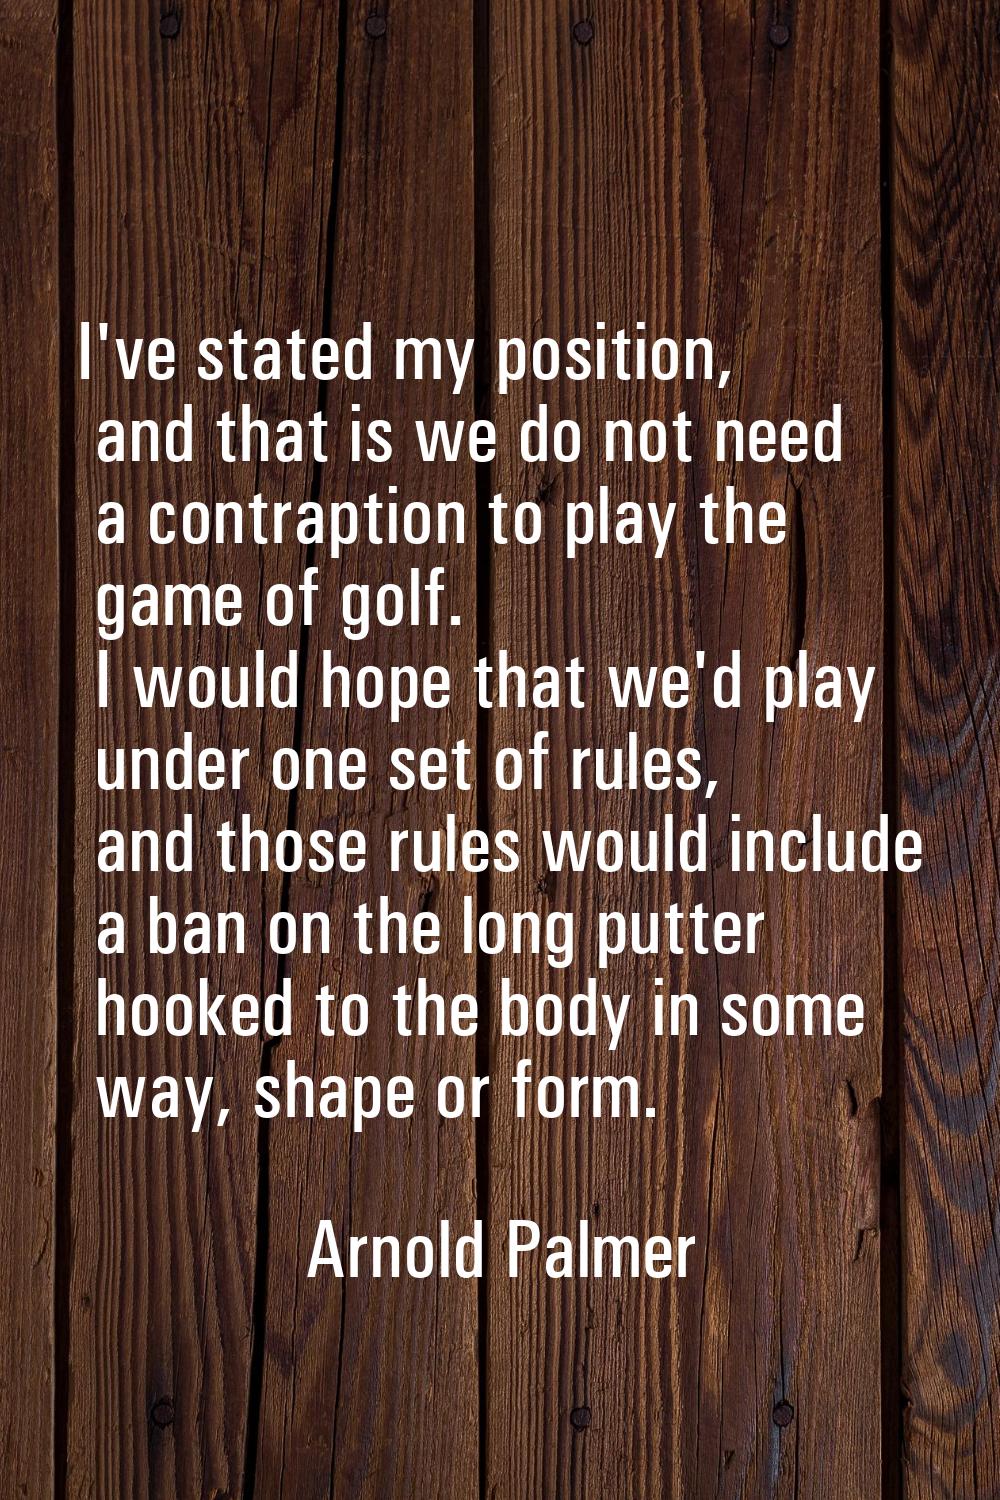 I've stated my position, and that is we do not need a contraption to play the game of golf. I would